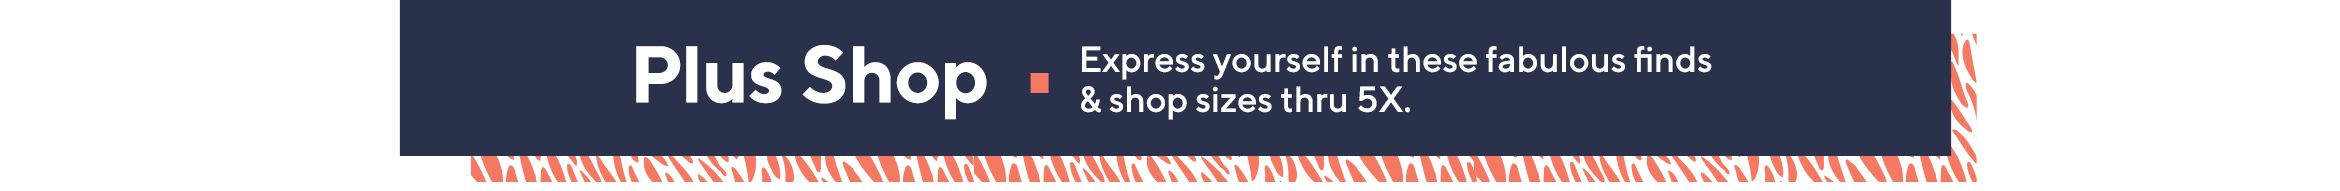 Plus Shop   Express yourself in these fabulous finds & shop sizes thru 5X. 